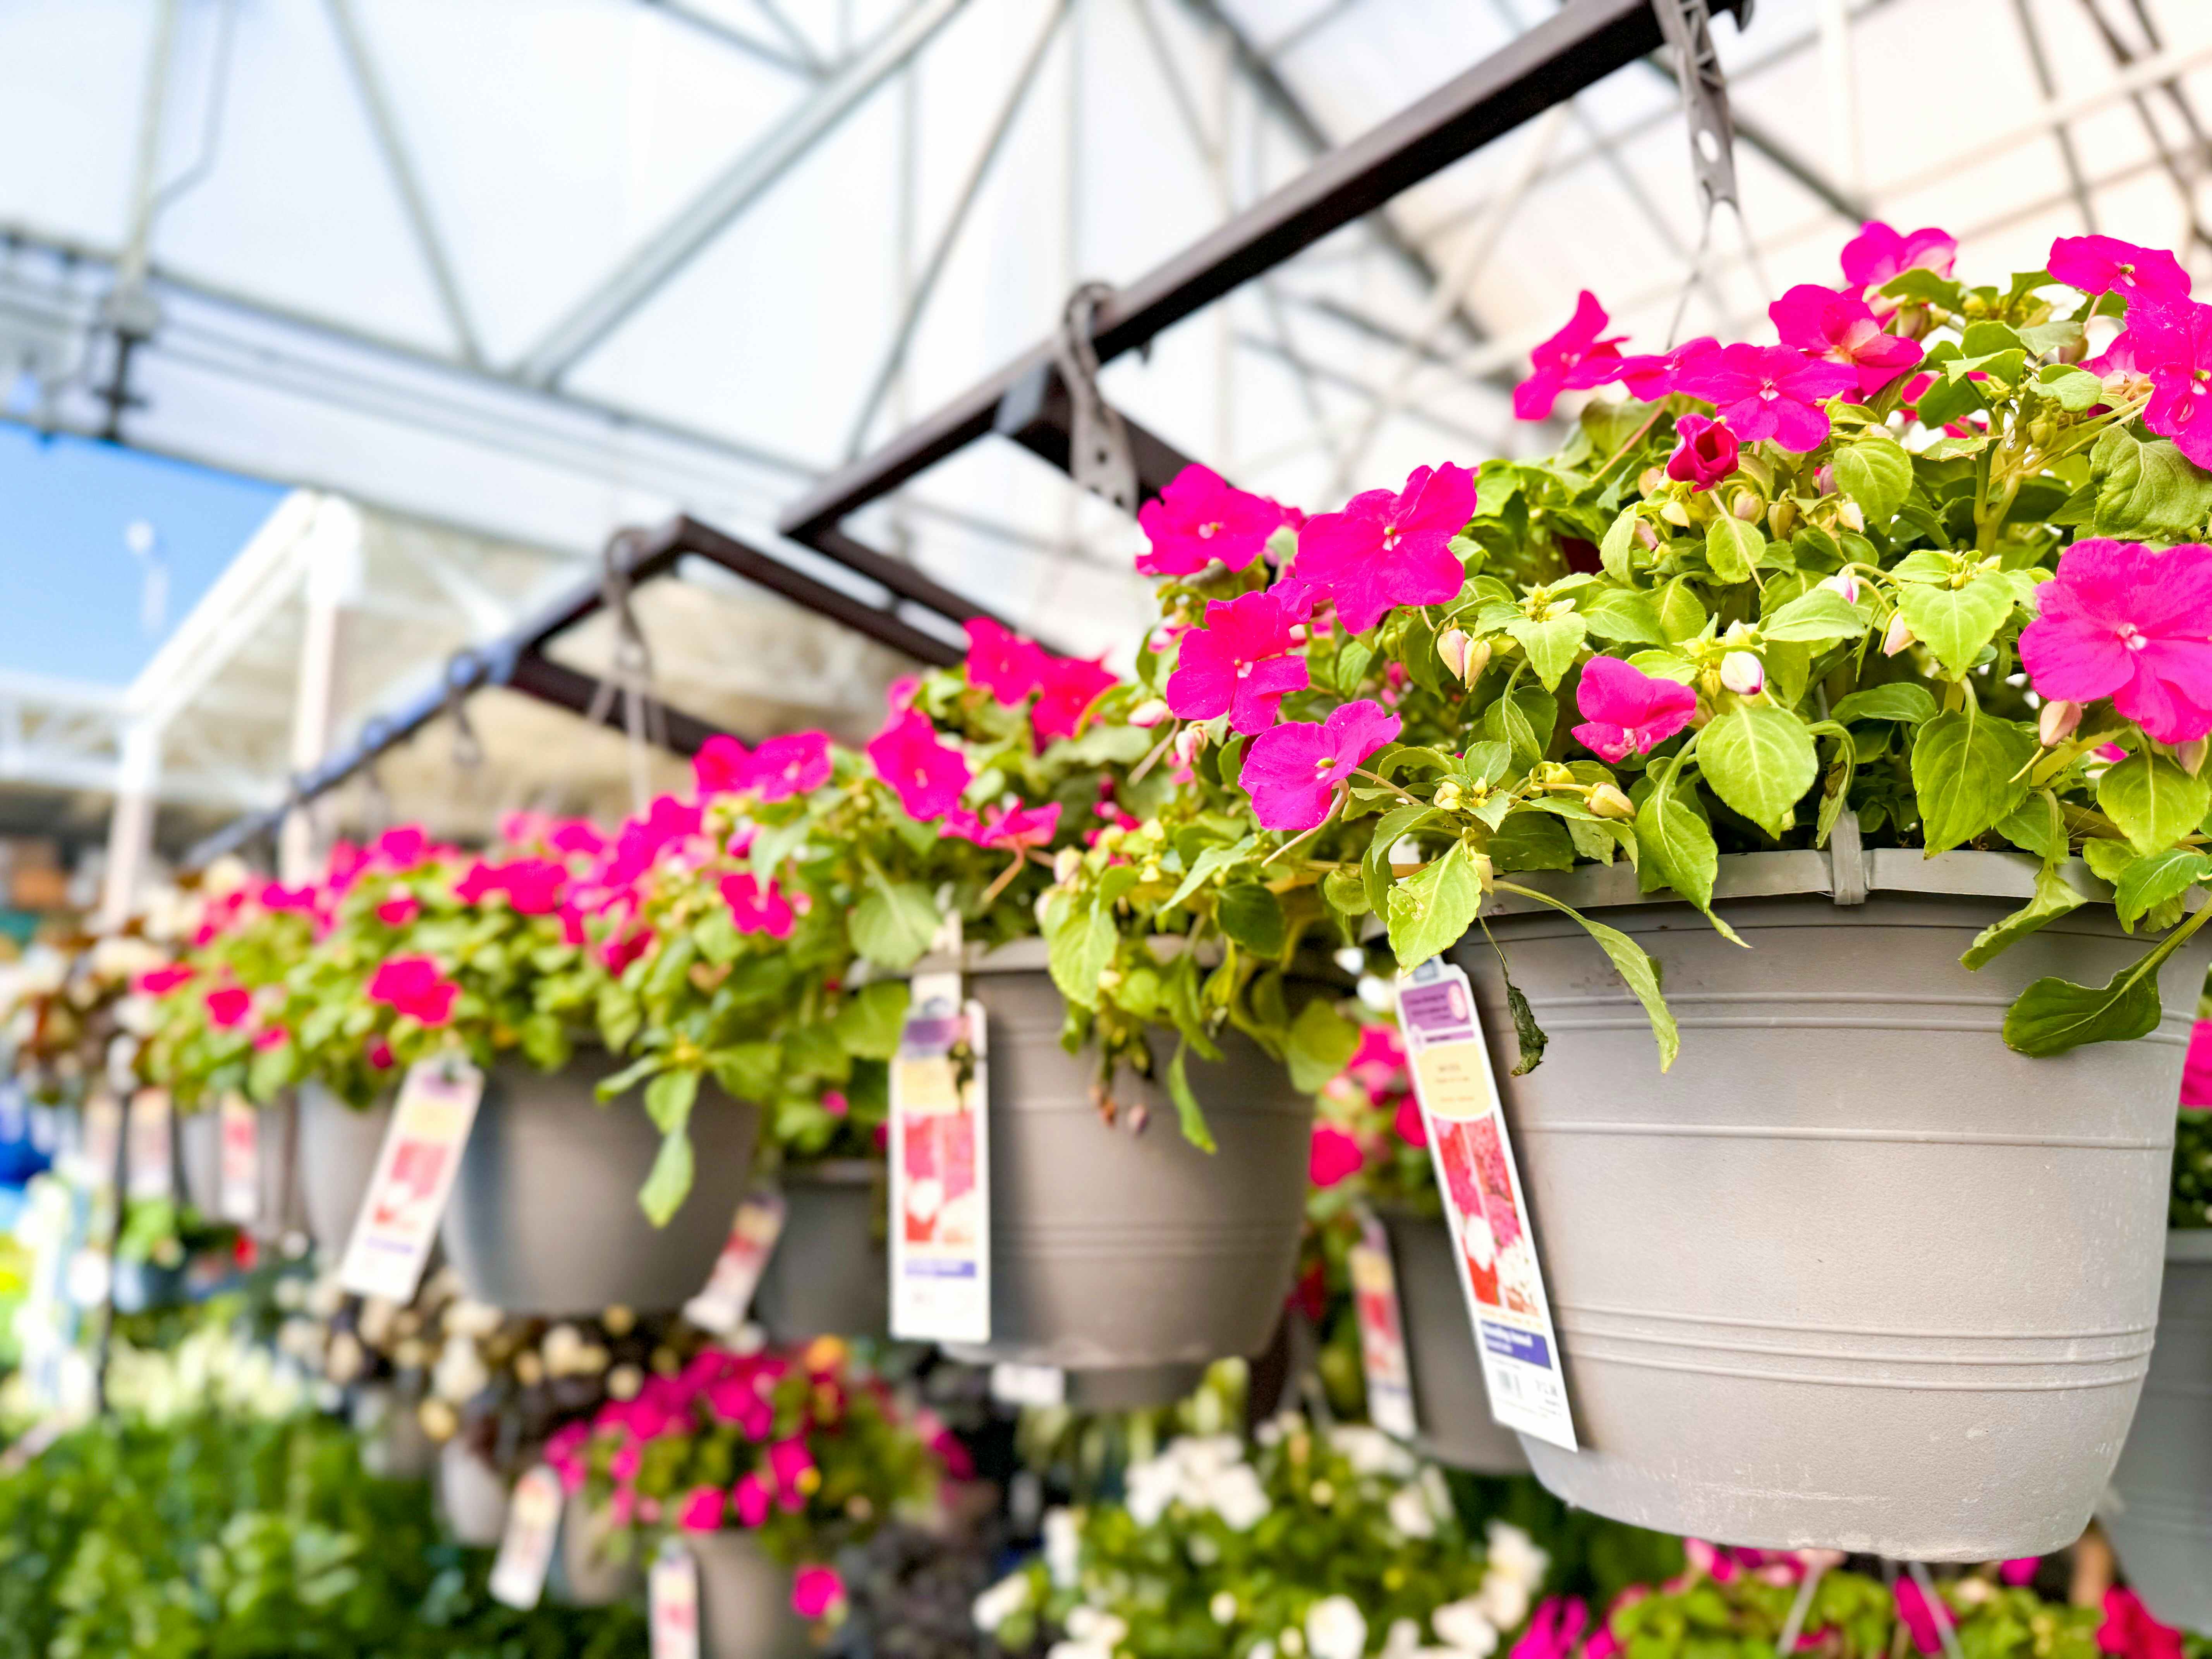 Hanging Flower Baskets, as Low as $8 Each at Lowe's